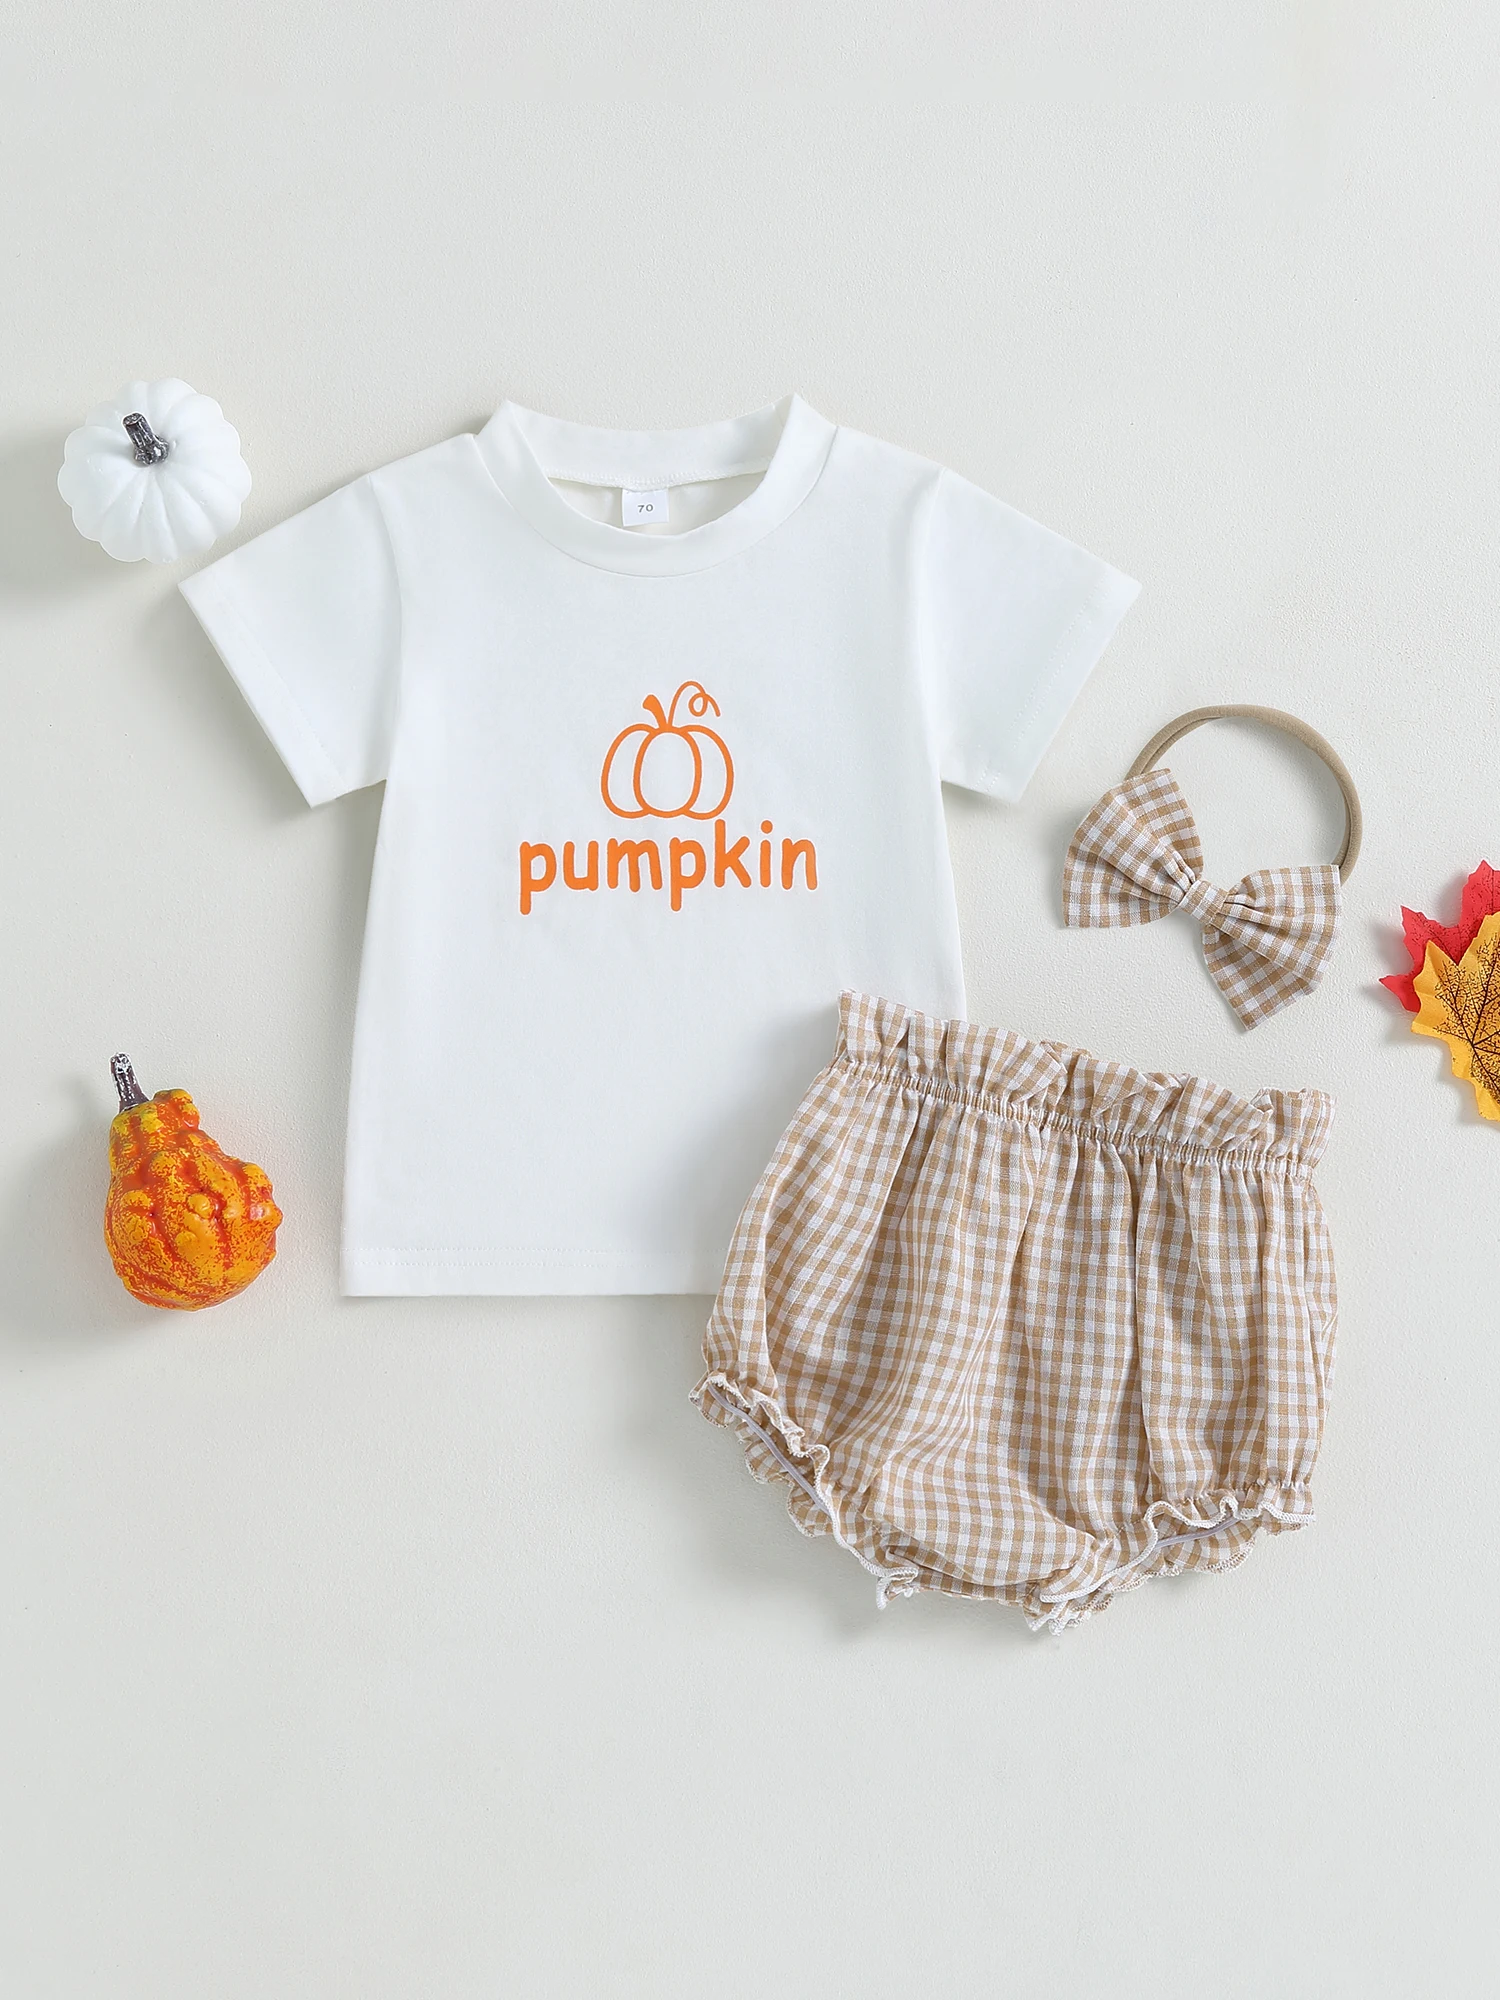 

Adorable 3-Piece Baby Girl Halloween Costume Set with Pumpkin Print Romper Shorts and Headband for a Spooky Cute Look